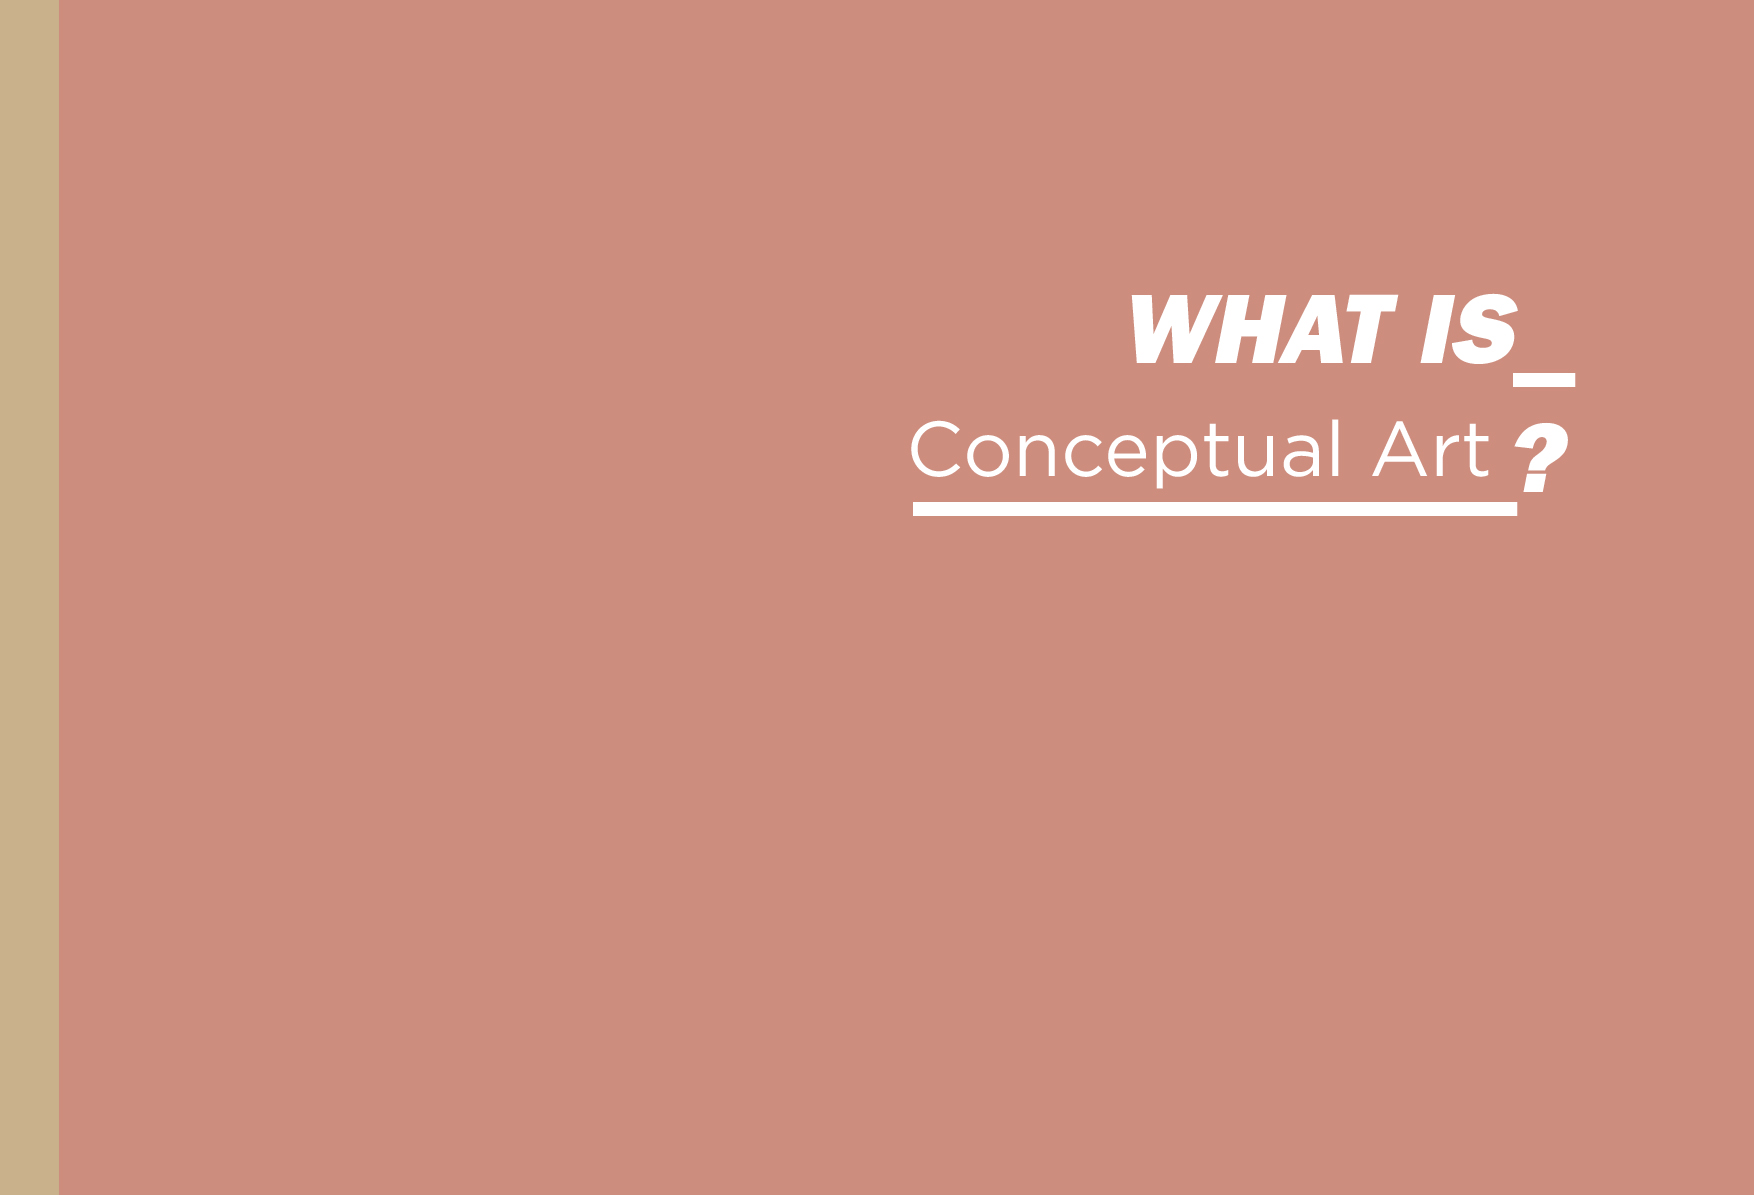 What is Conceptual Art